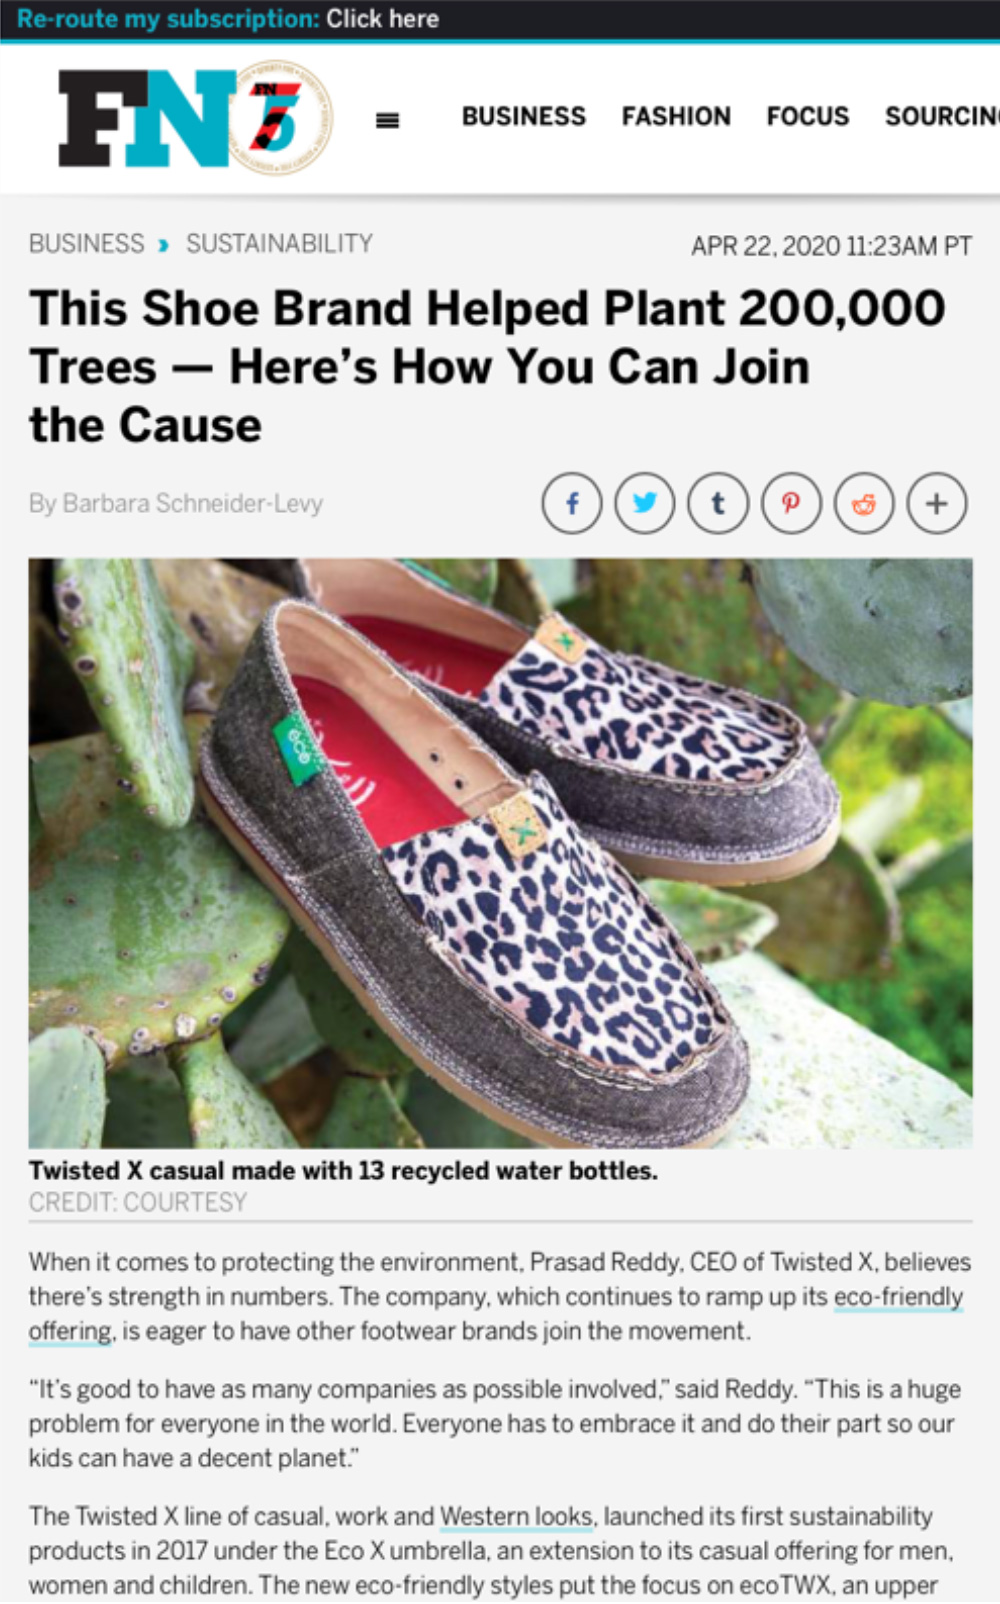 This Shoe Brand Helped Plant 200,000 Trees - Here's How You Can Join the Cause